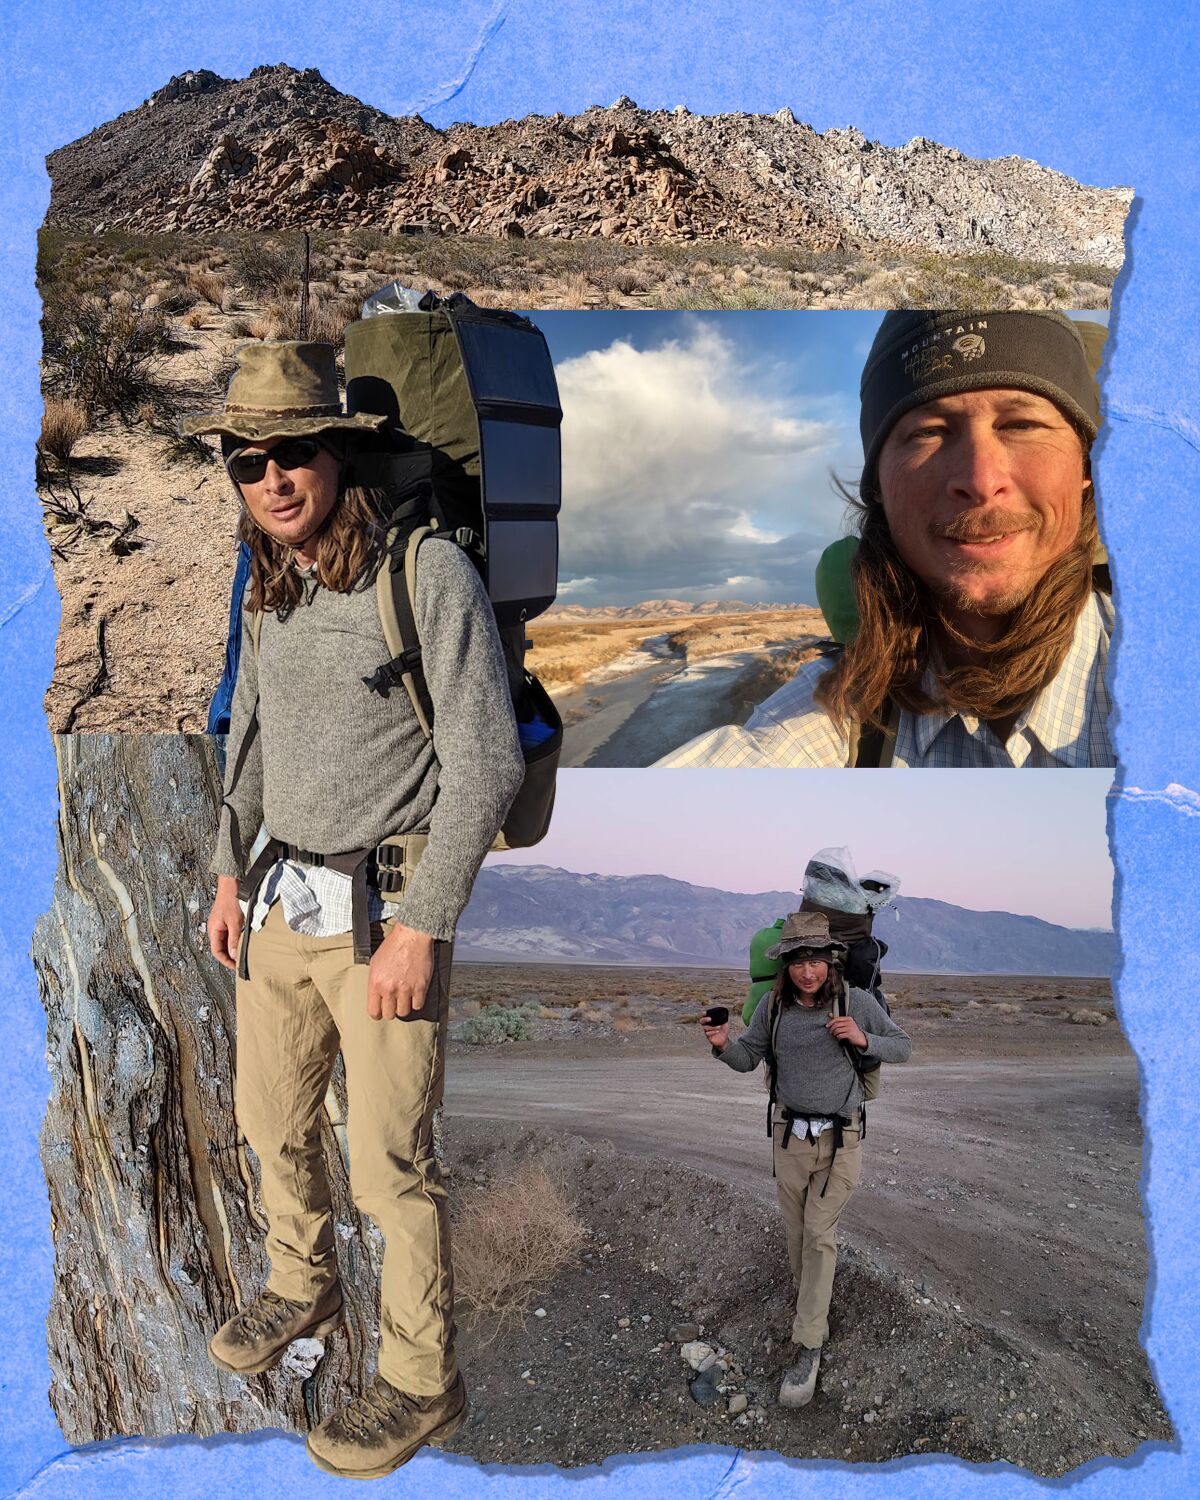 Three photos of a hiker with a heavy backpack.